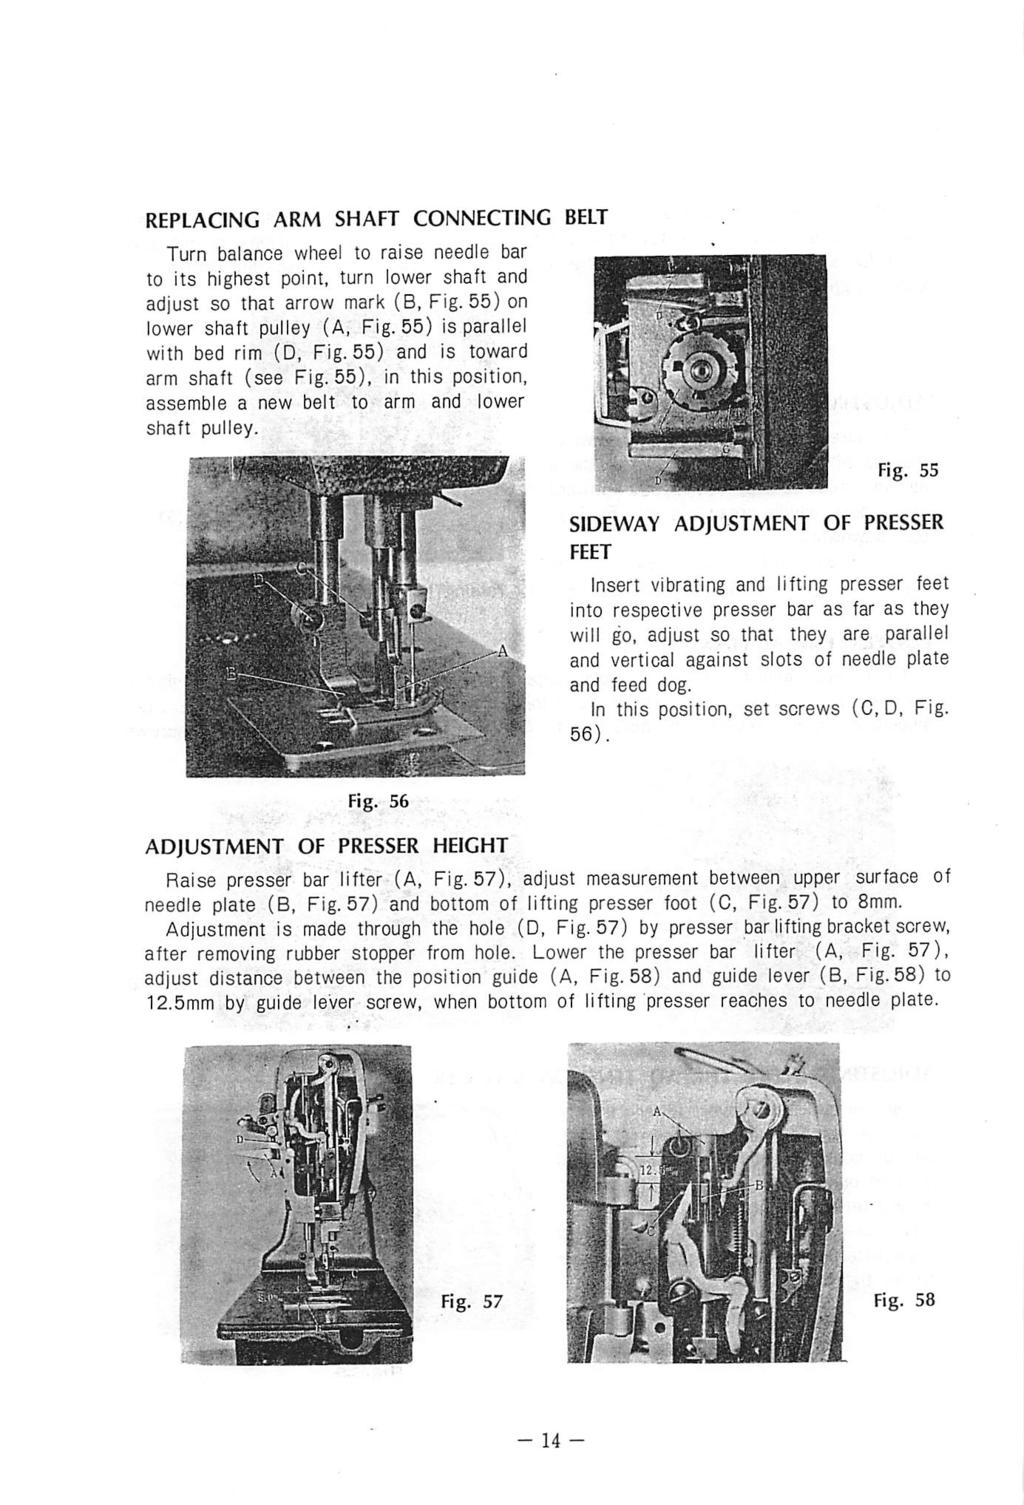 REPLACING ARM SHAFT CONNECTING BELT Turn balance wheel to raise needle bar to its highest point, turn lower shaft and 9 adjust so that arrow mark (B, Fig. 55) on 9 lower shaft pulley (A, Fig.